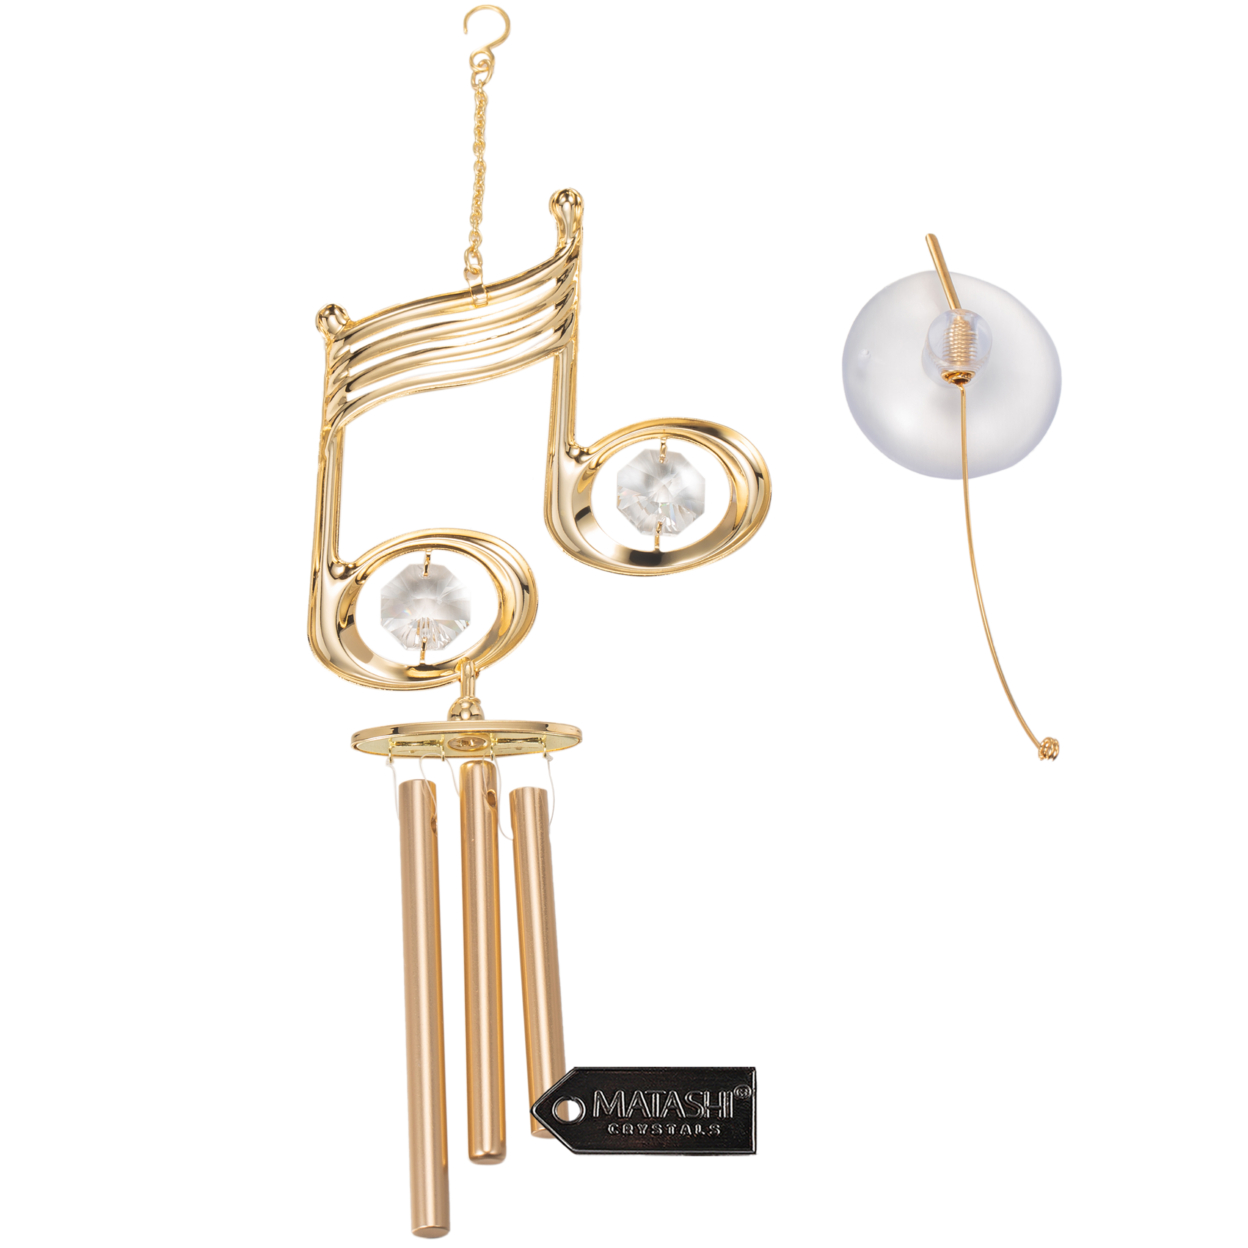 24K Gold Plated Crystal Studded Musical Note Decorative Wind Chime By Matashi